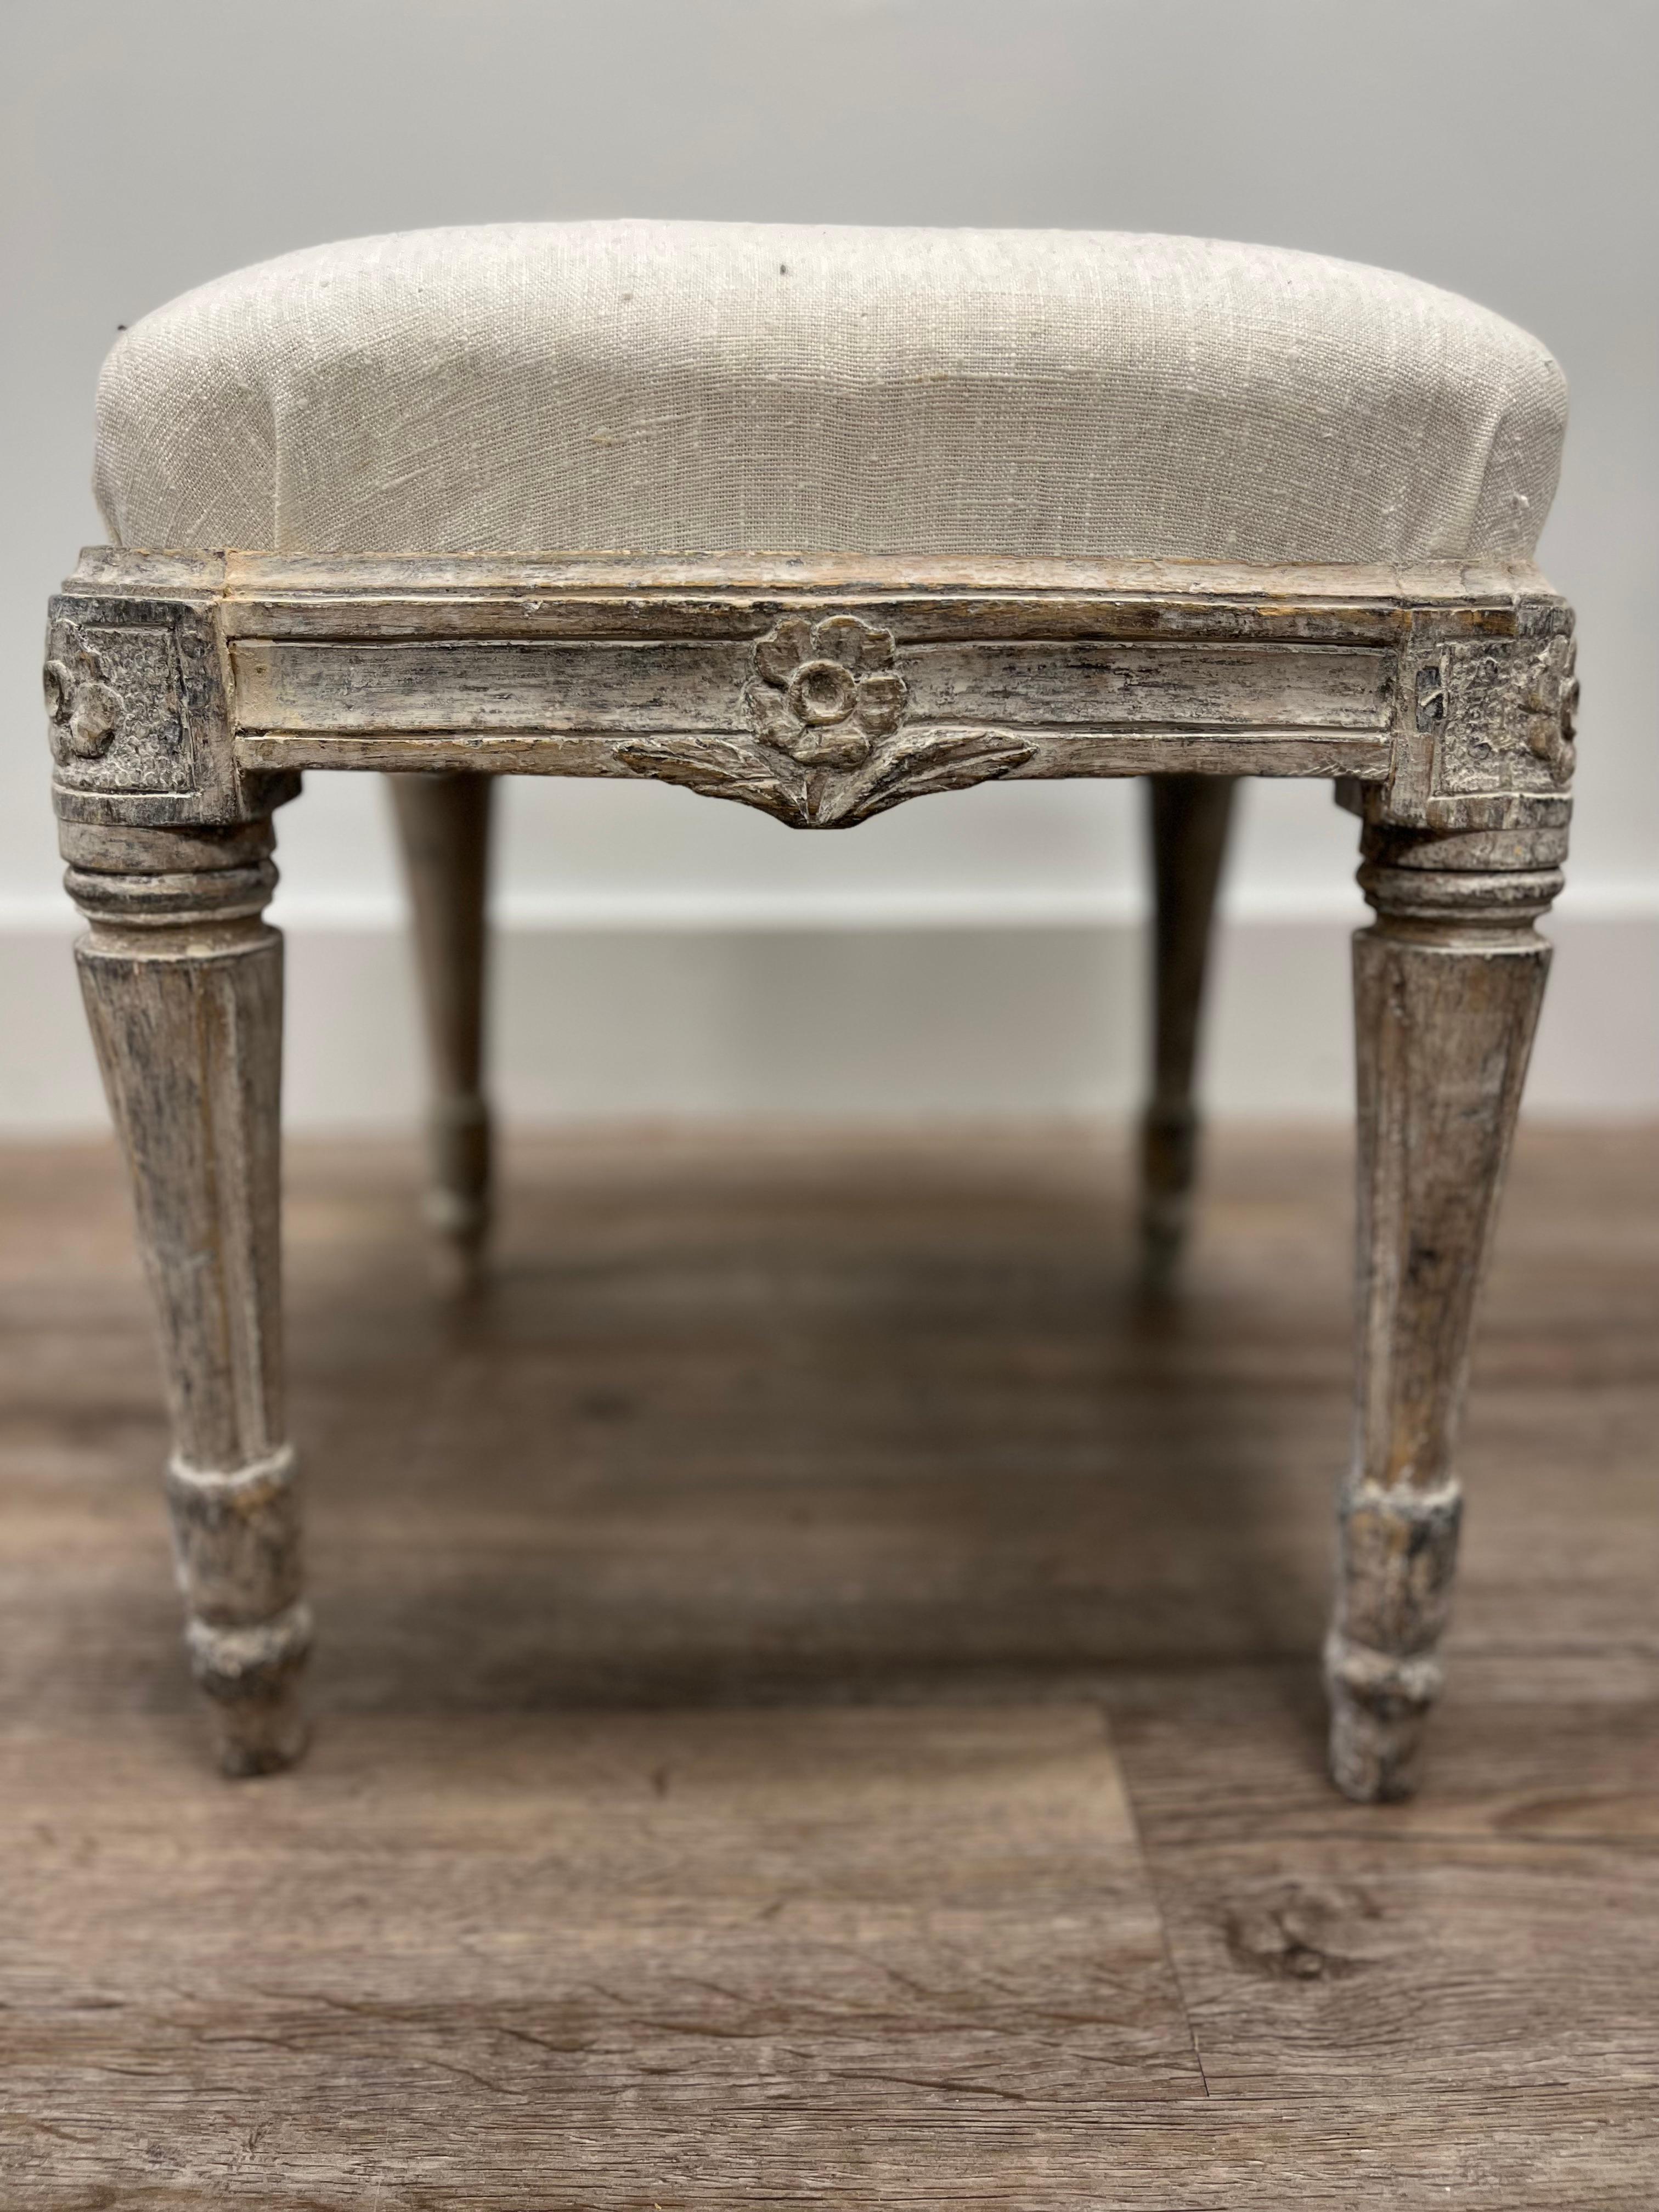 An unusual pair of Rococo-Gustavian transitional footstools made in Stockholm. The base has rounded fleurons on the corners and a flower-leaf carving in the bowed center. The legs are turned, tapered and fluted. This piece has older grey paint and